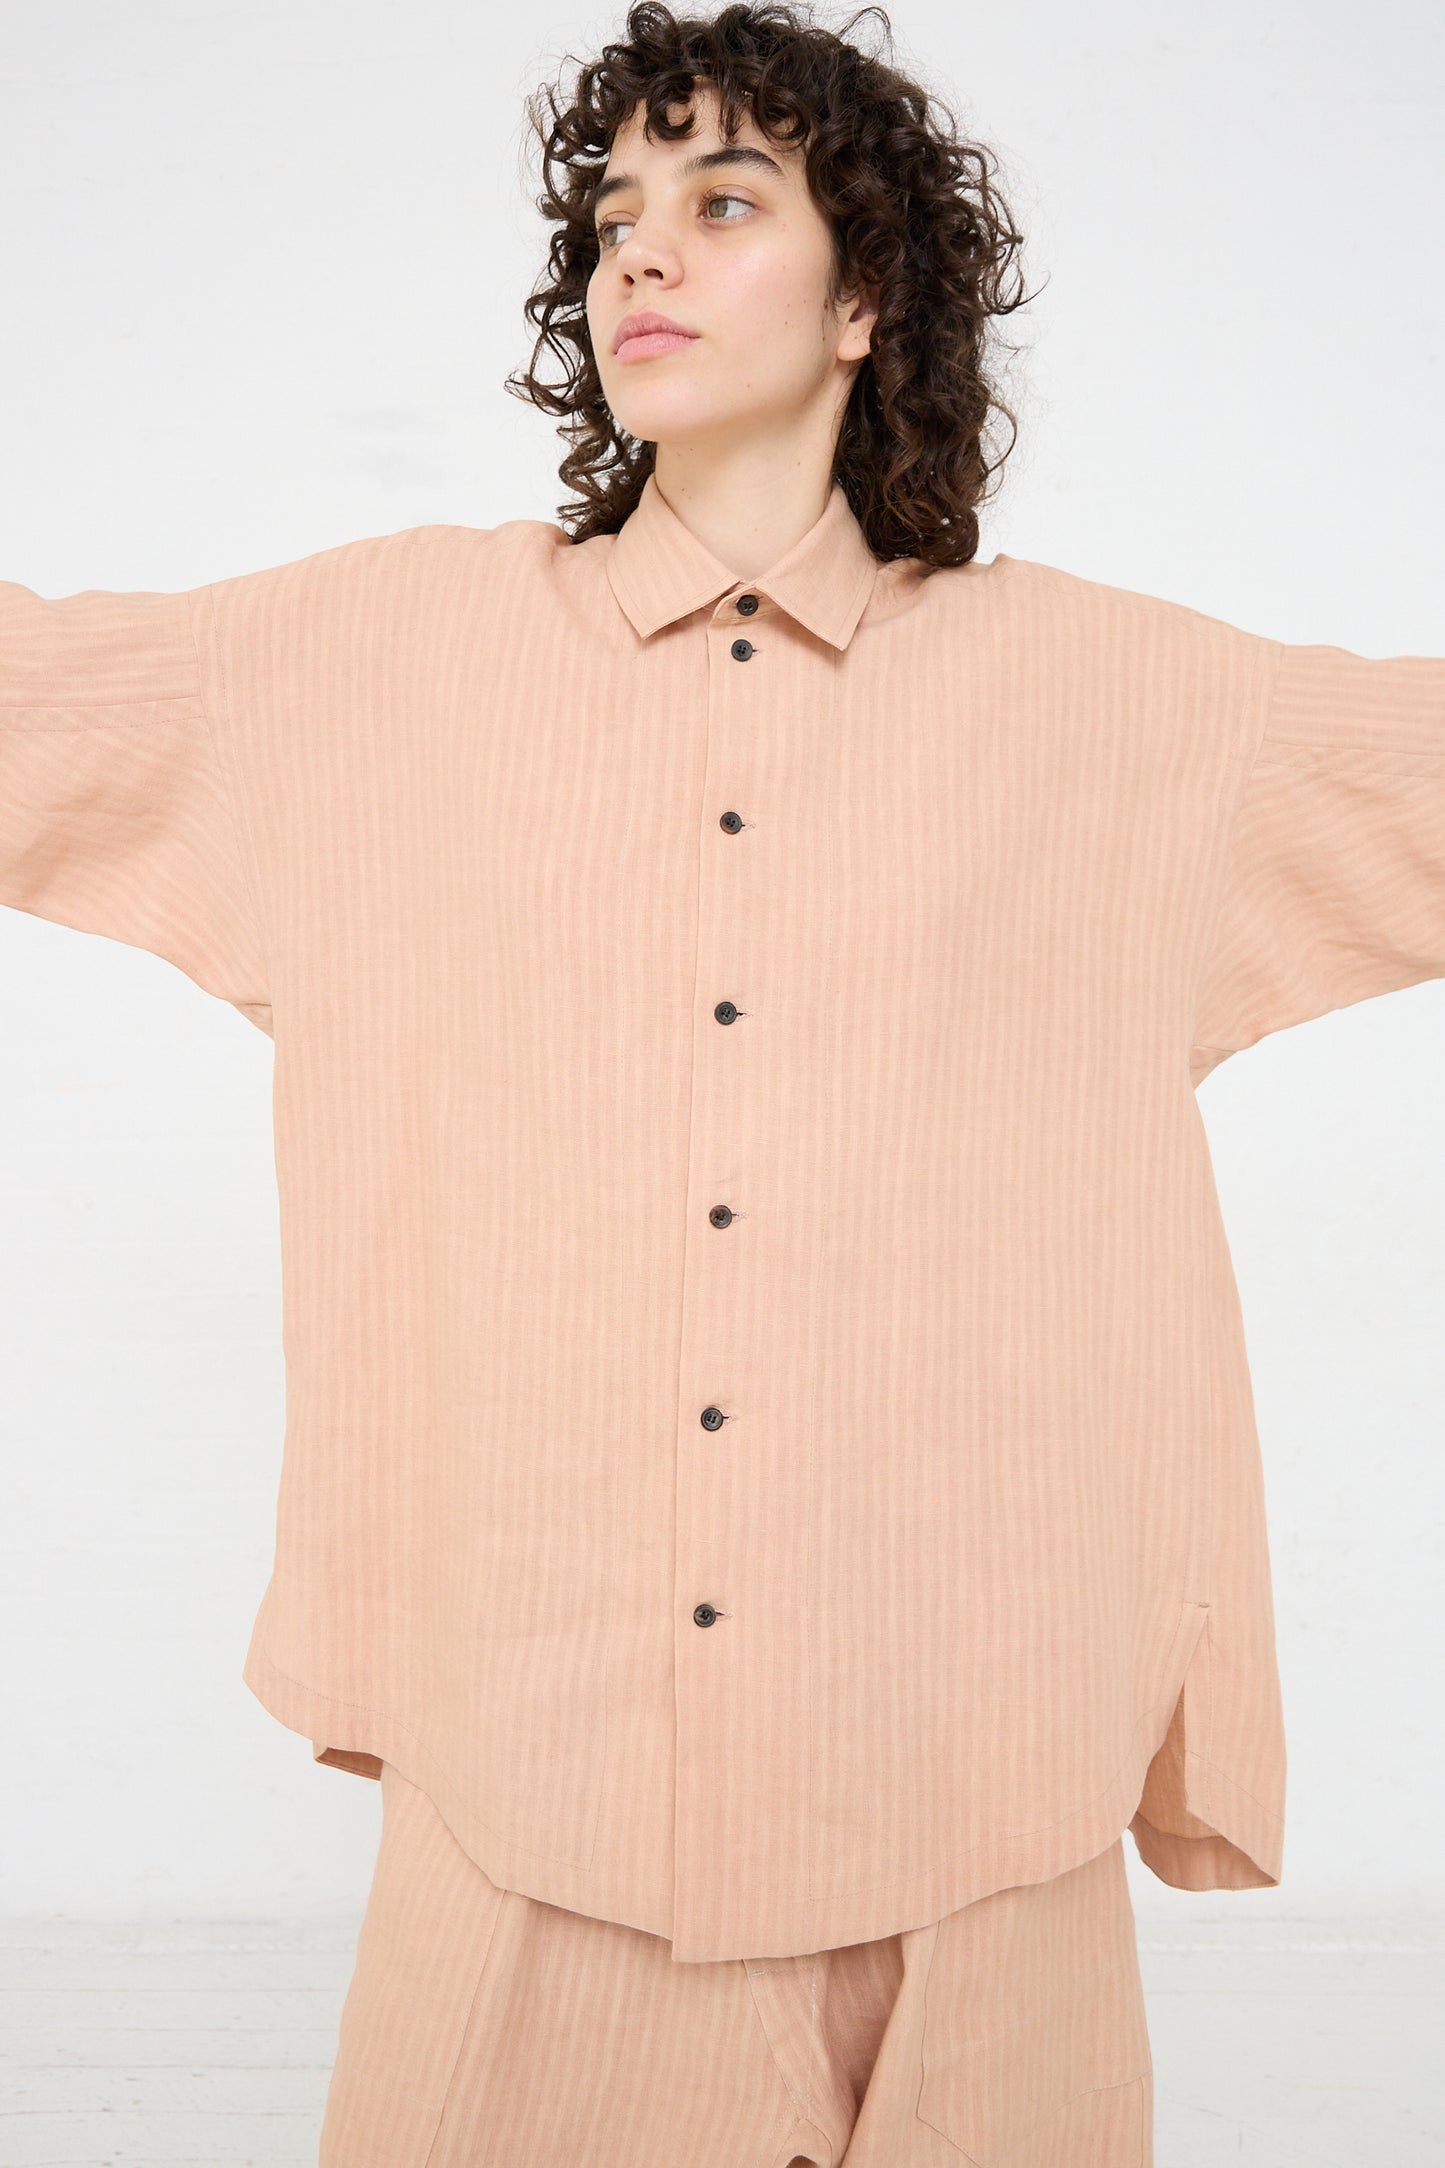 The model is wearing a relaxed fit peach Woven Linen Shirt in Ume and pants by Jan-Jan Van Essche.